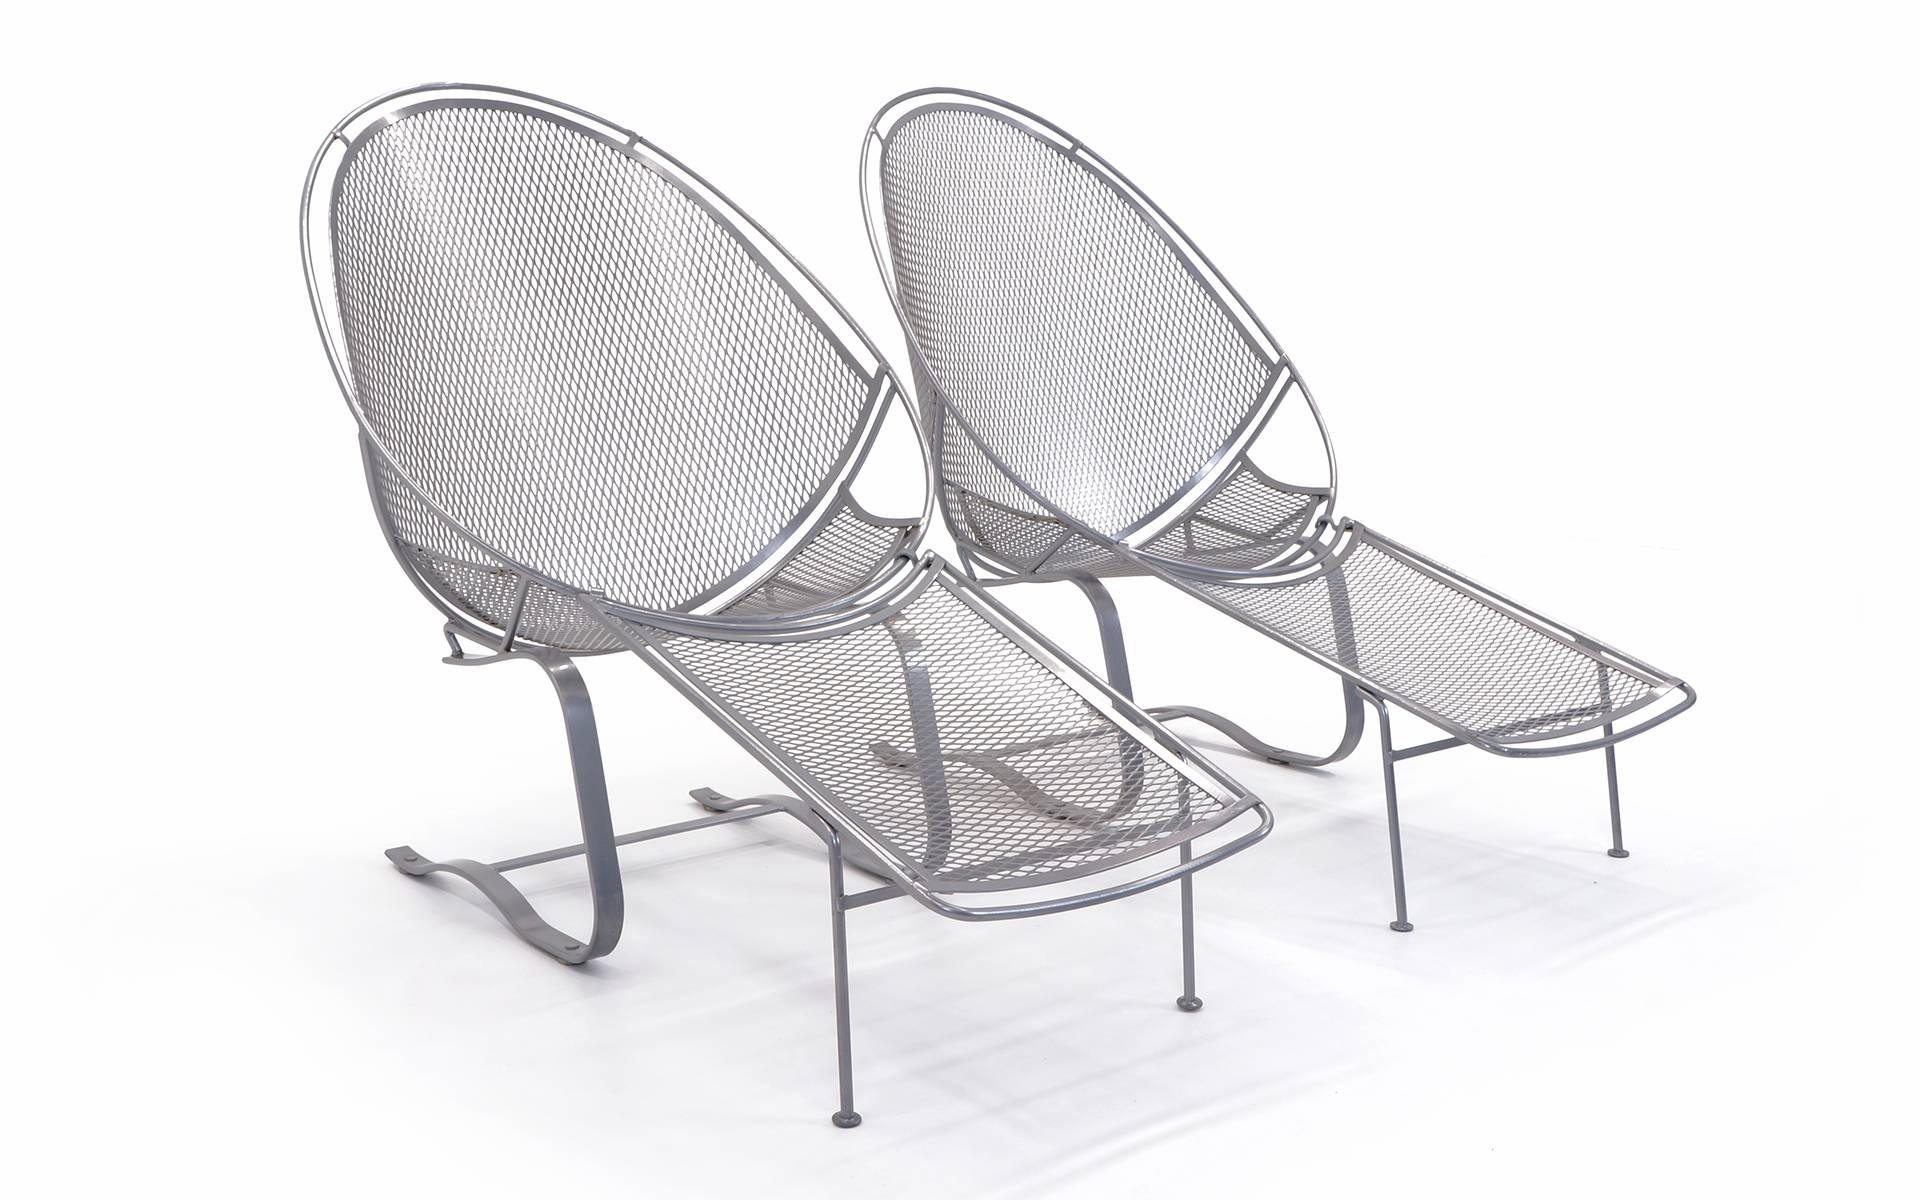 Four available. This listing is for two (one pair). Outdoor or pool high back lounge chairs on Springer base, with removable footrests or ottomans, designed for John Salterini Company, Brooklyn NY, 1965. These were professionally powder coated two